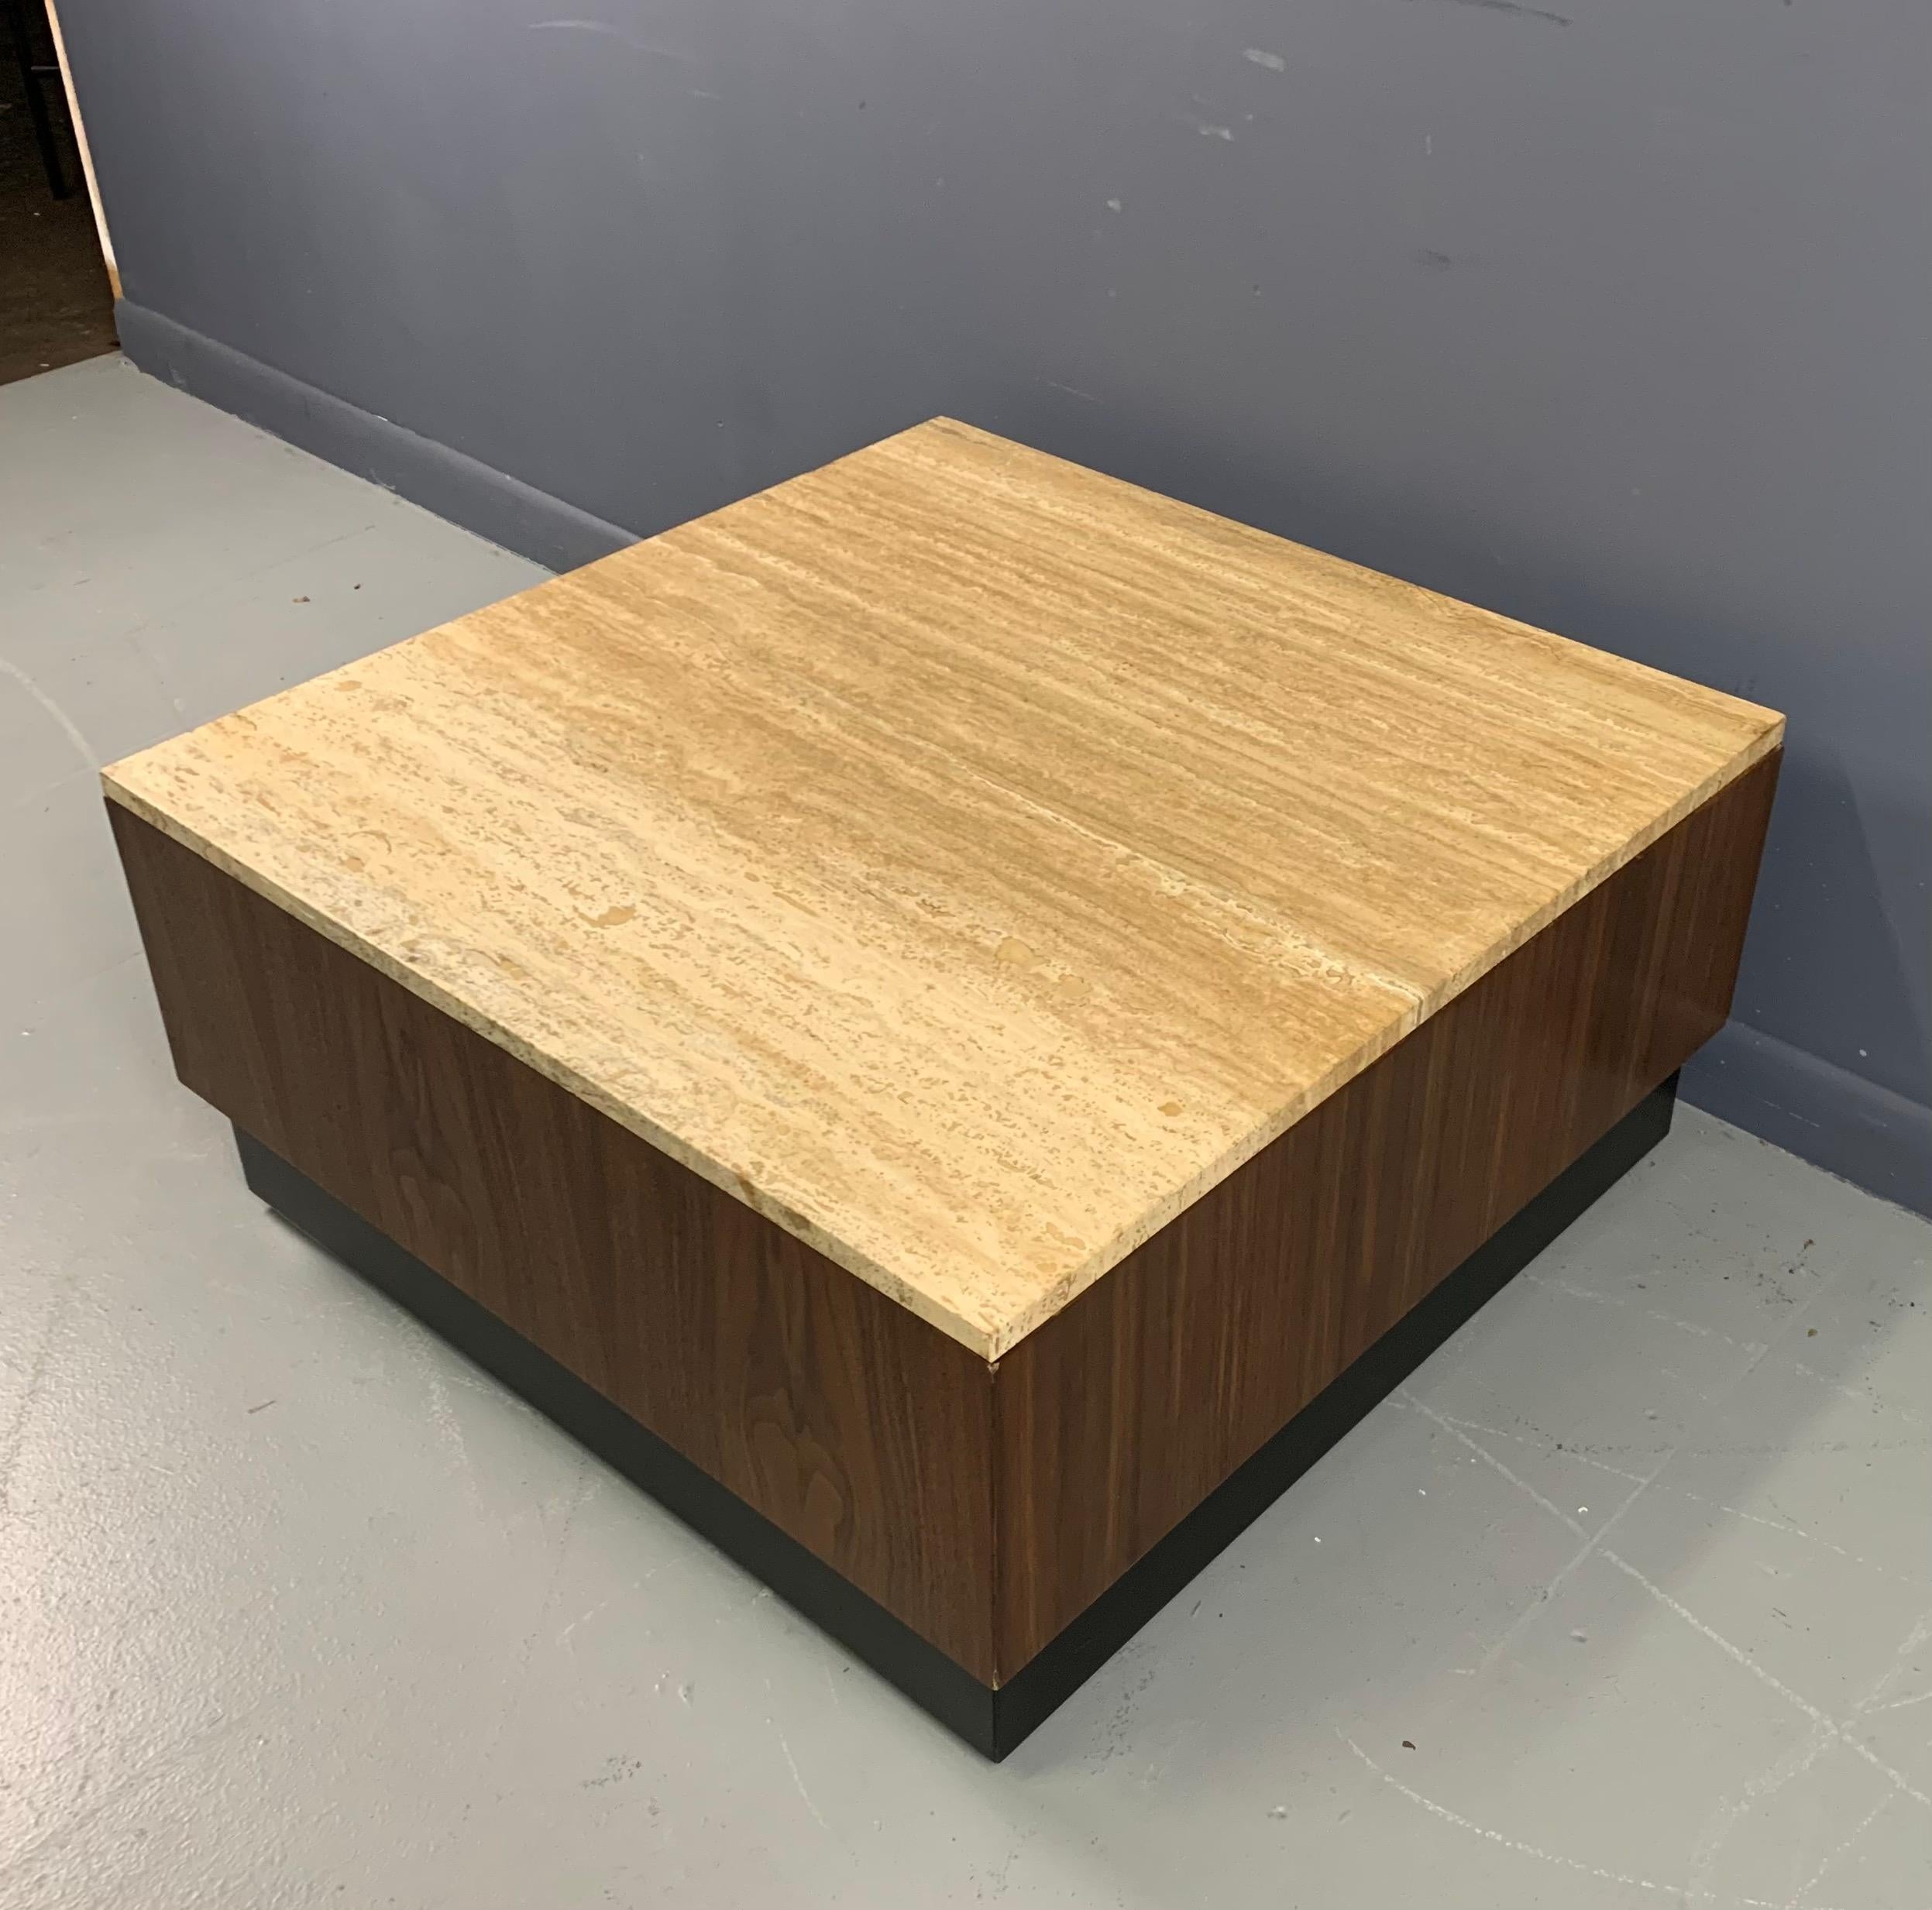 European Travertine and Walnut Midcentury Coffee Table on a Black Plinth Base For Sale